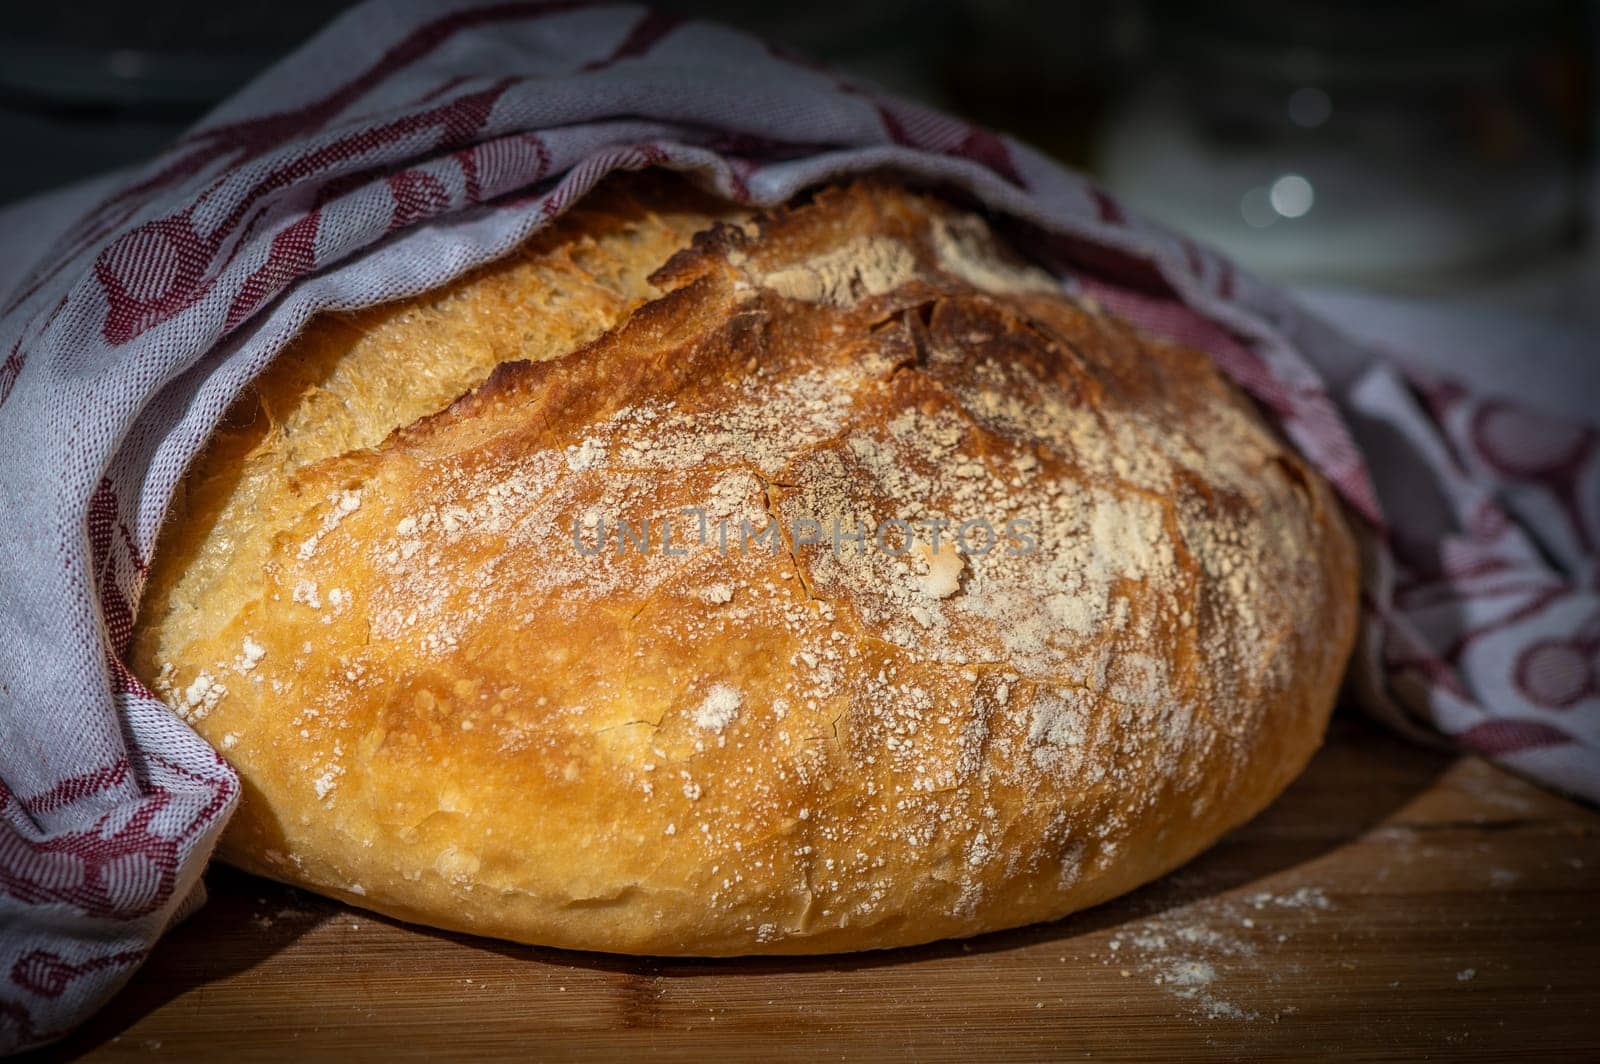 freshly baked loaf of bread from the oven, home recipe for tasty bread 1 by Mixa74